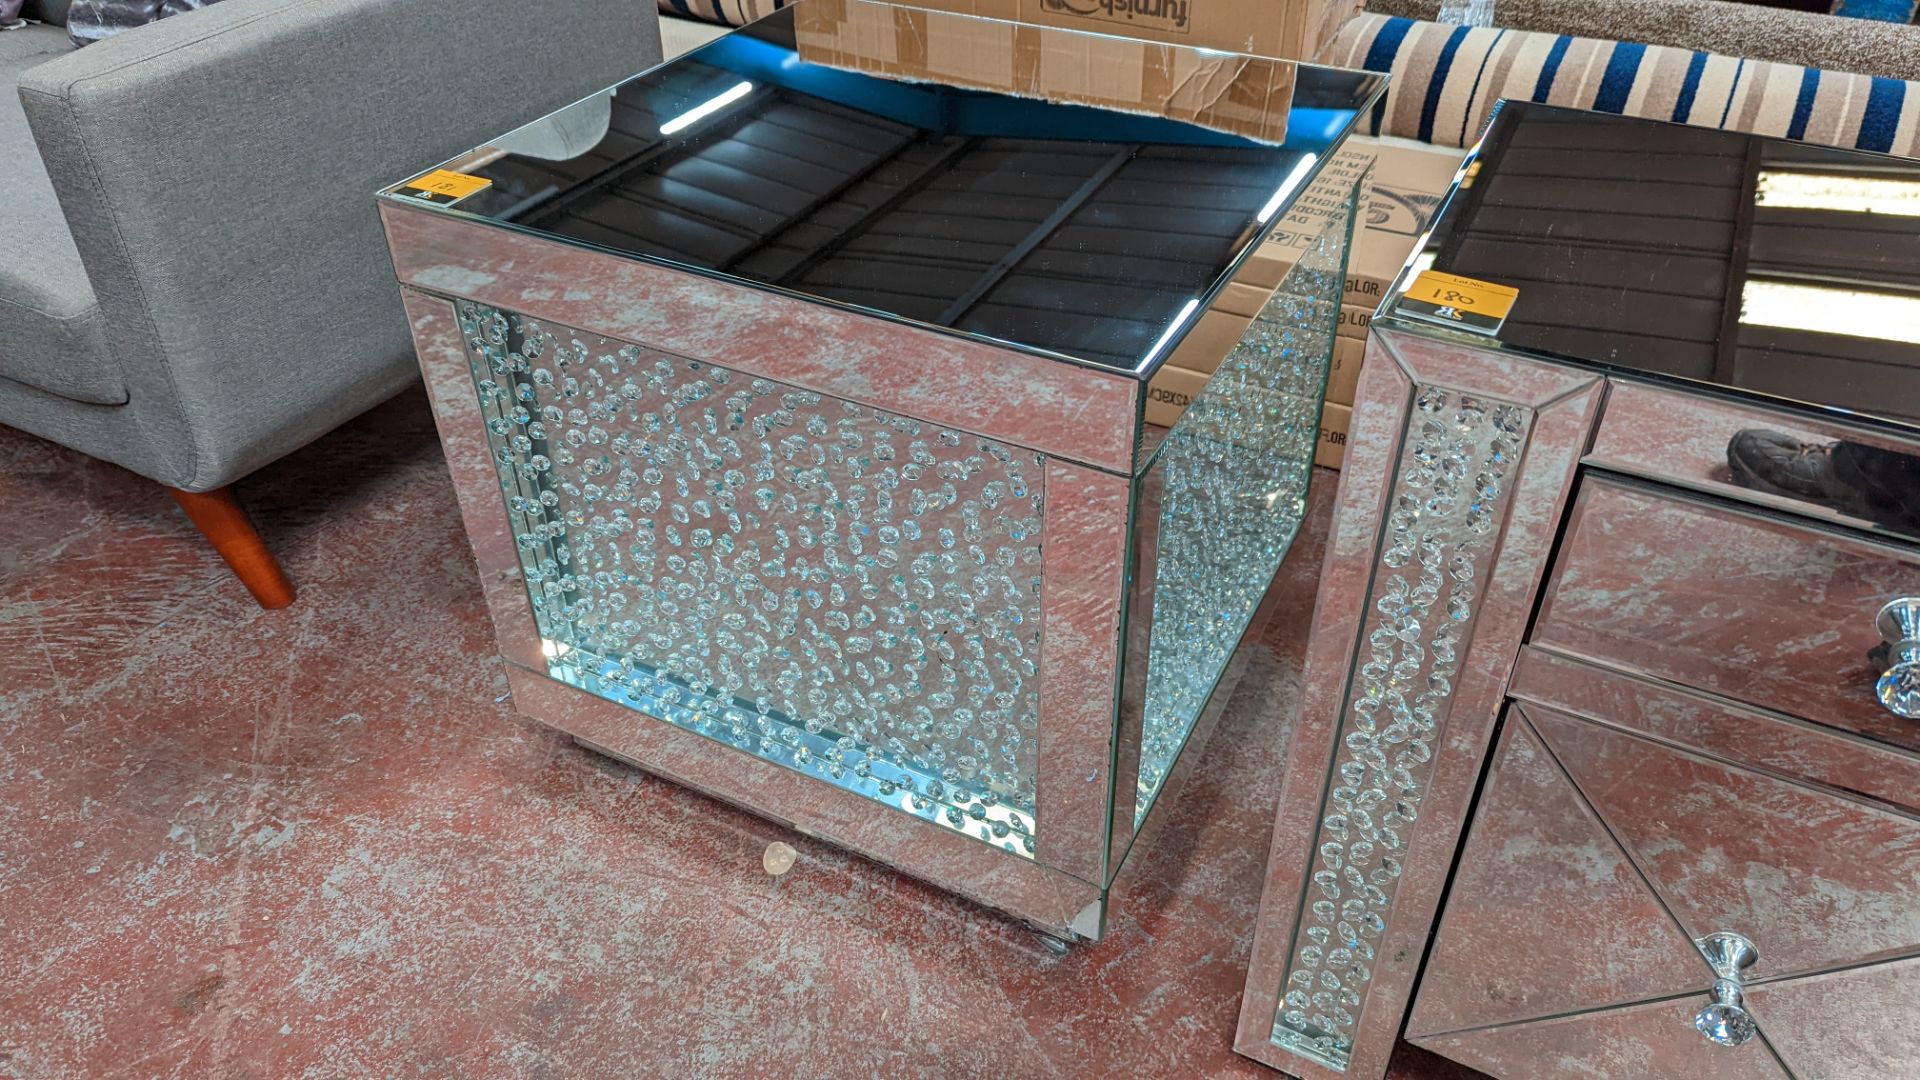 Square table with mirrored top & "bubbles" detailing. Max dimensions approximately 61cm x 61cm. Pl